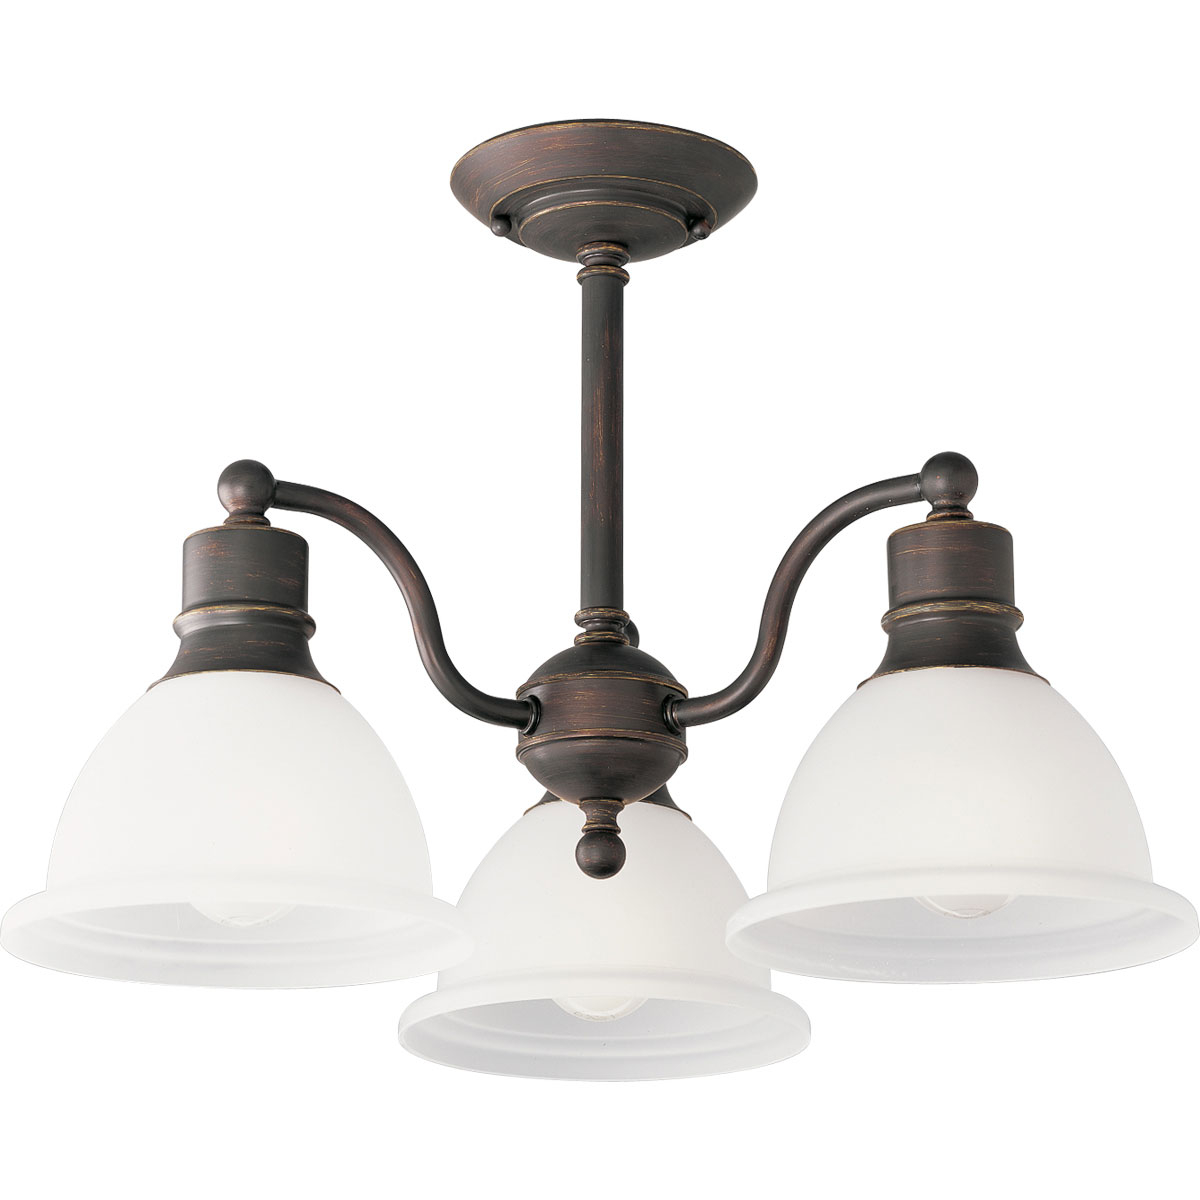 The Madison collection features etched glass with transitional elements. Simplified vintage style. Three-light 20-3/4 in semi-flush close-to-ceiling fixture. Antique Bronze finish.